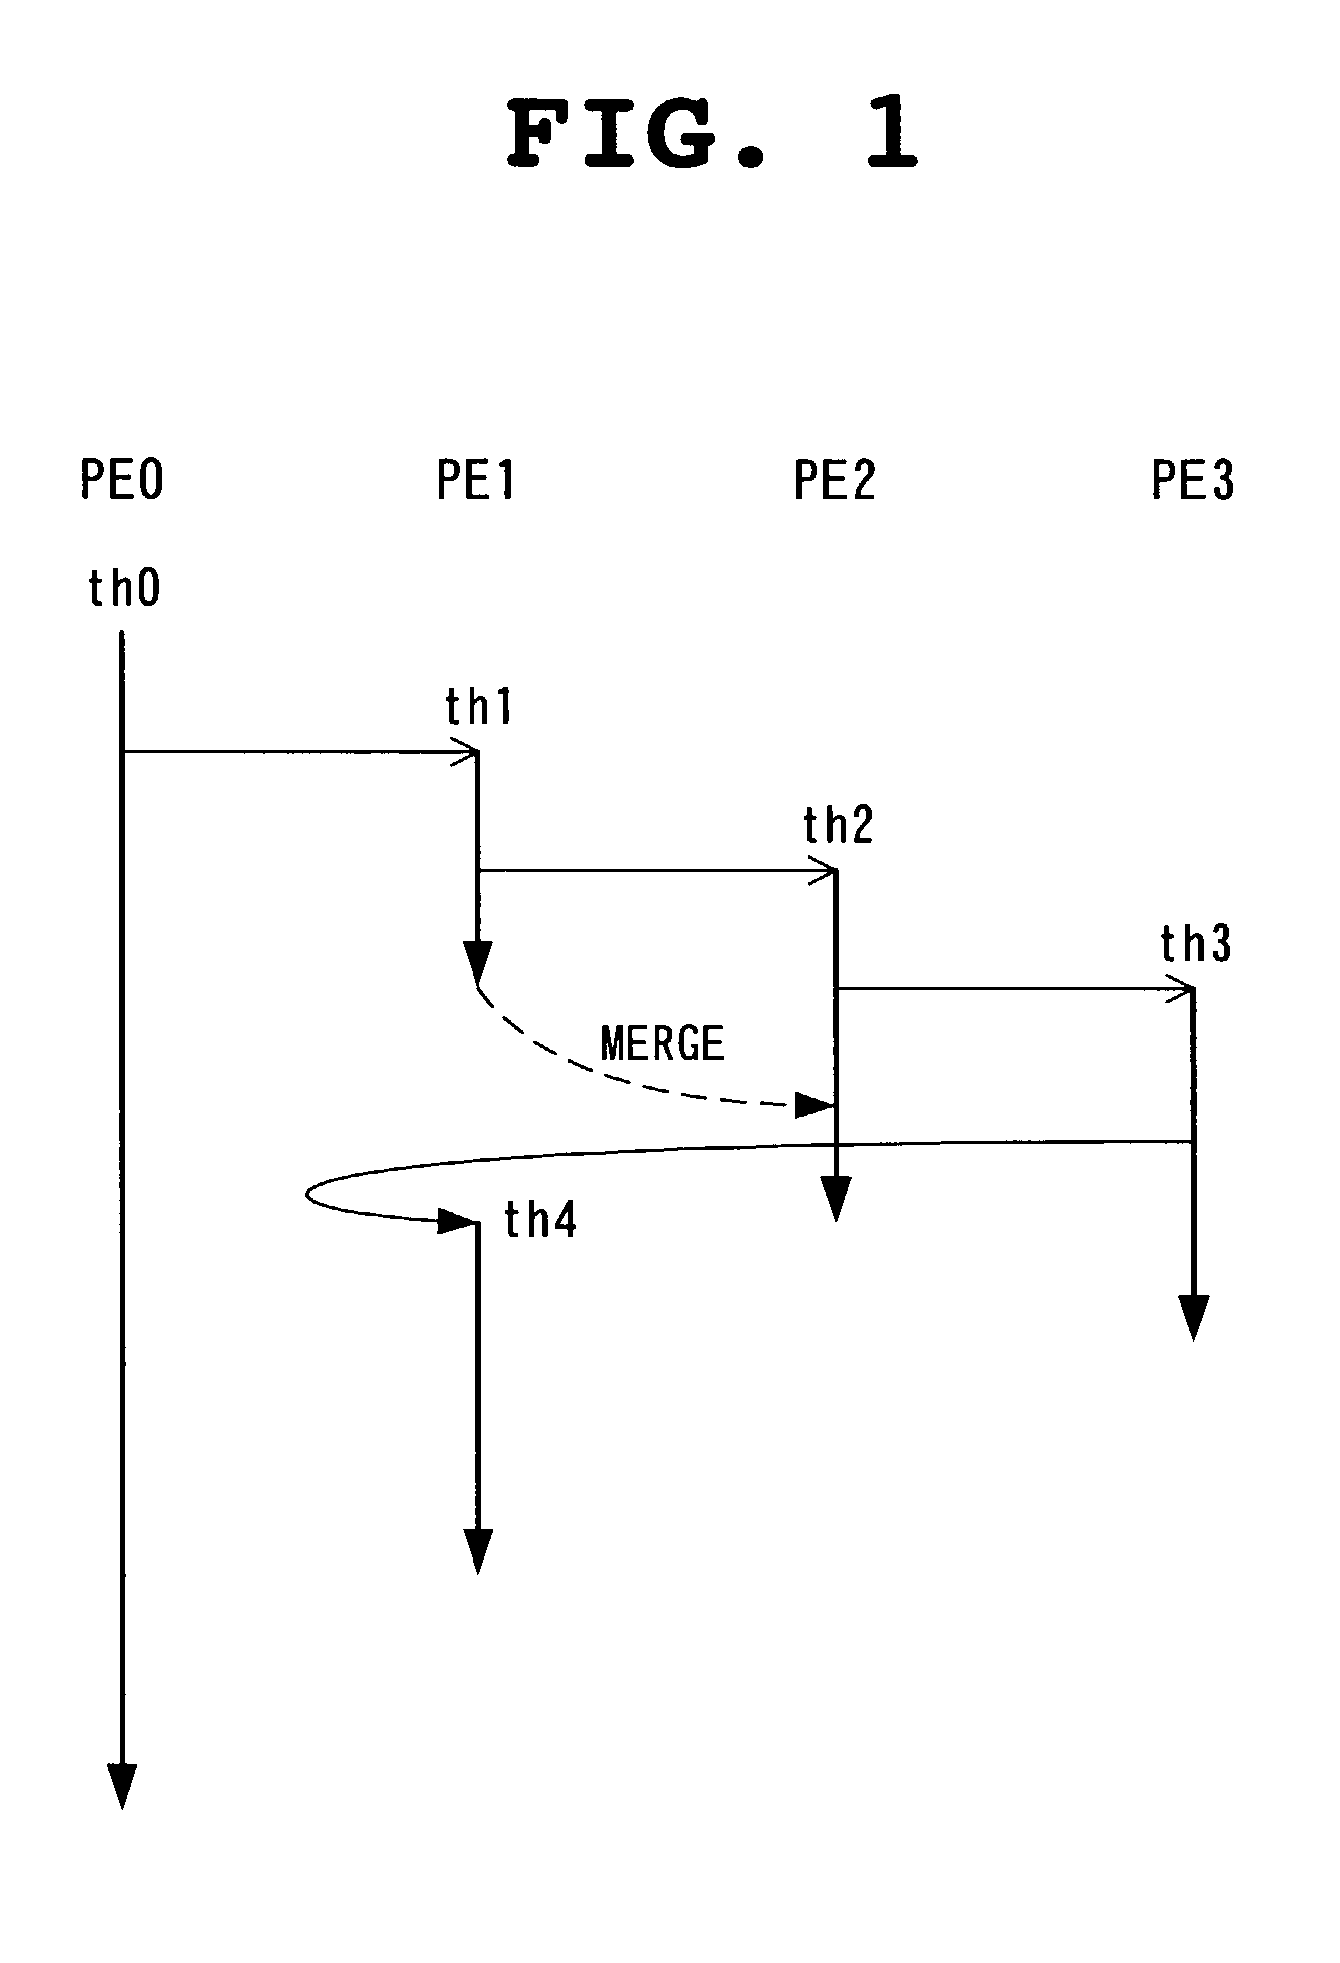 Multi-thread execution method and parallel processor system